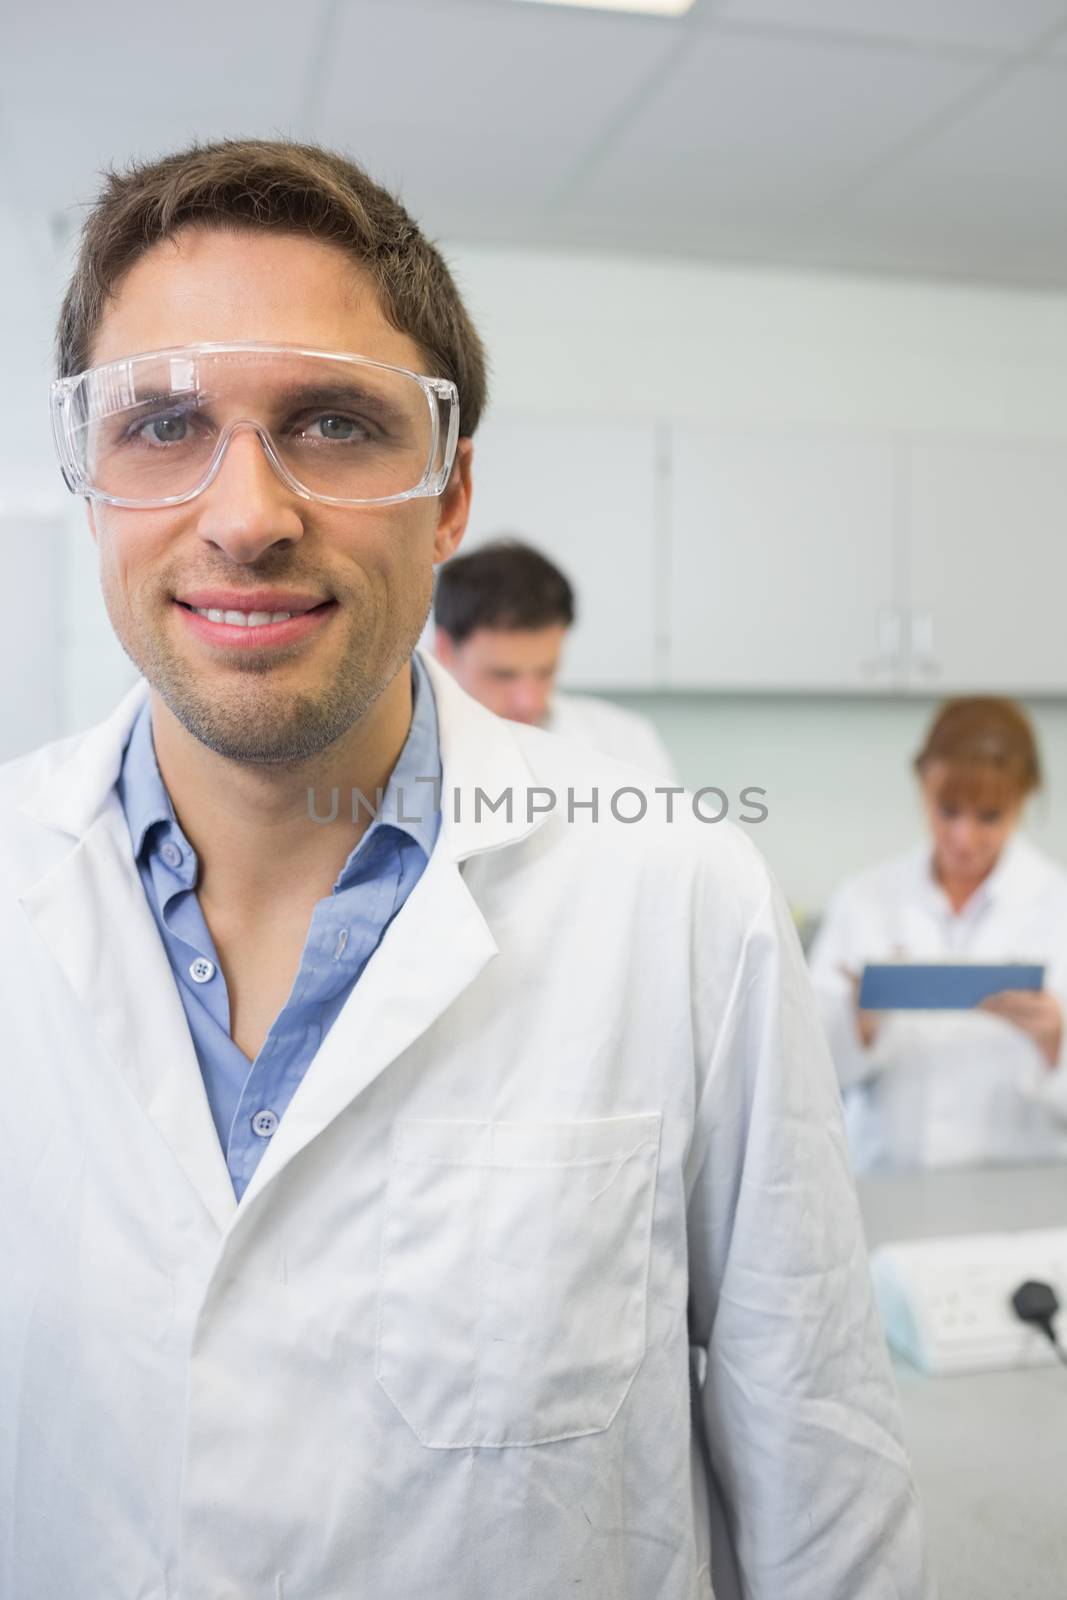 Portrait of a smiling scientist with colleagues at work in the laboratory